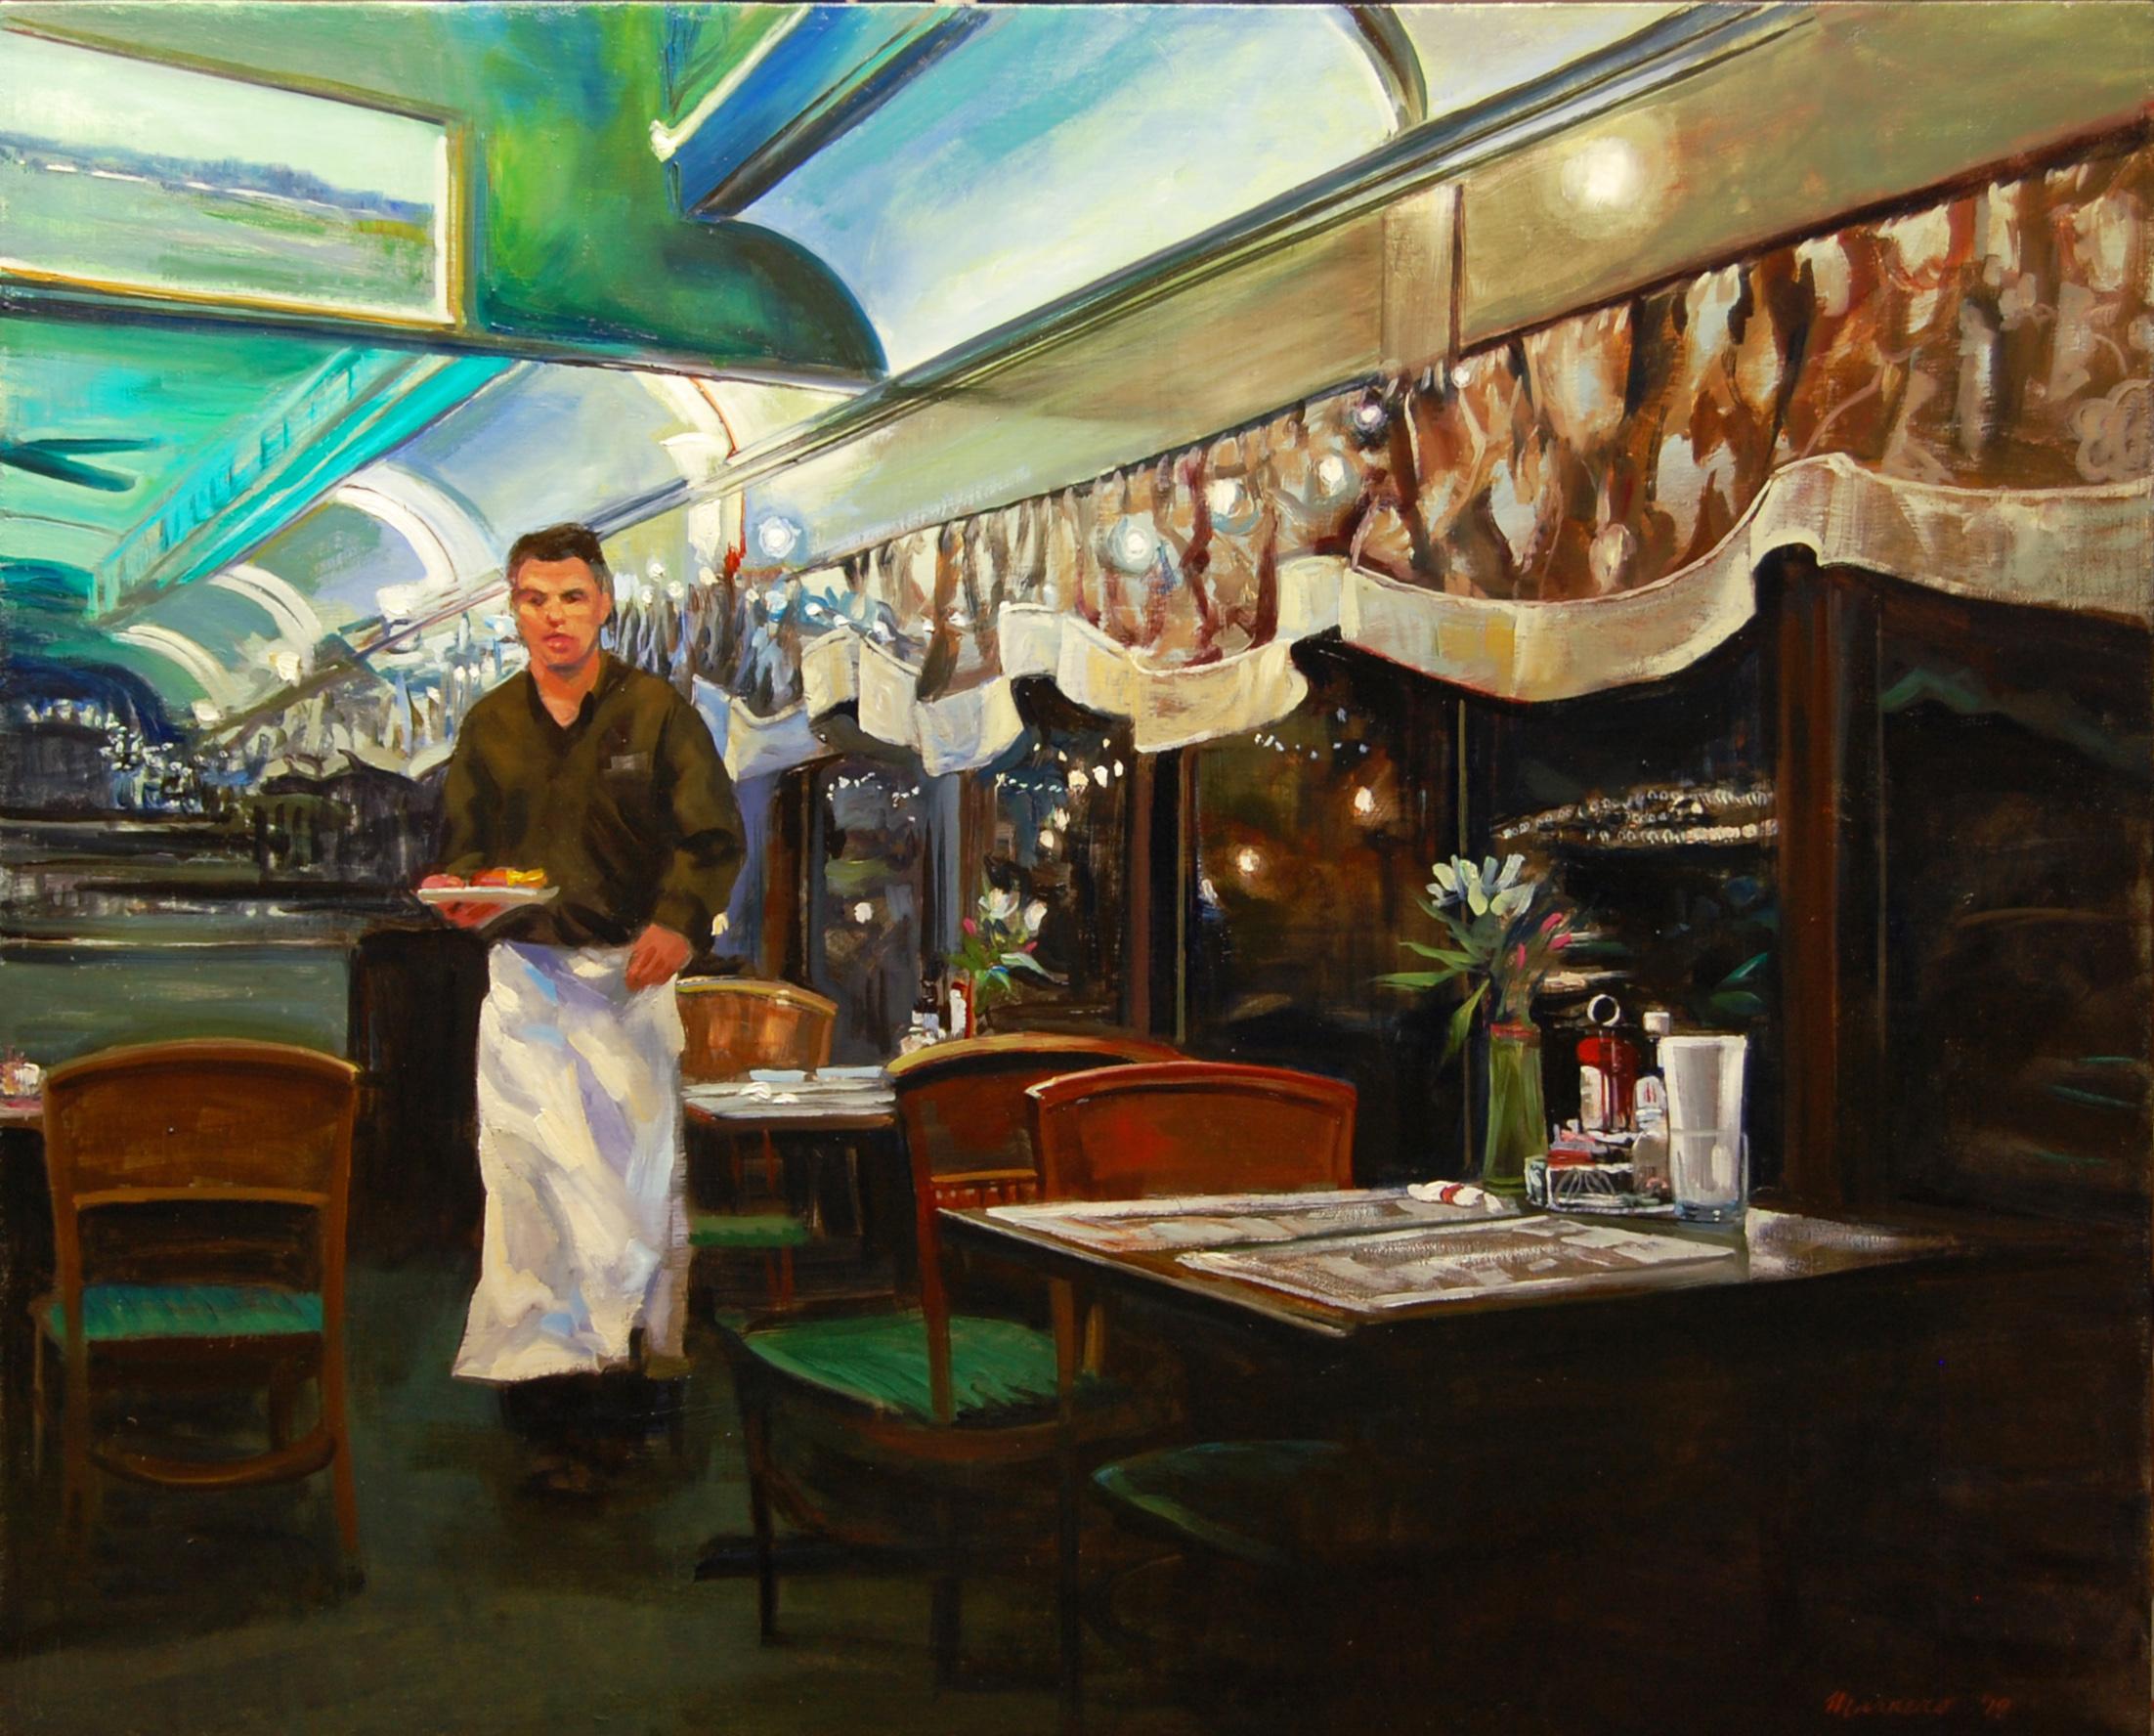 At the Clinton Station Diner, Oil Painting - Art by Onelio Marrero